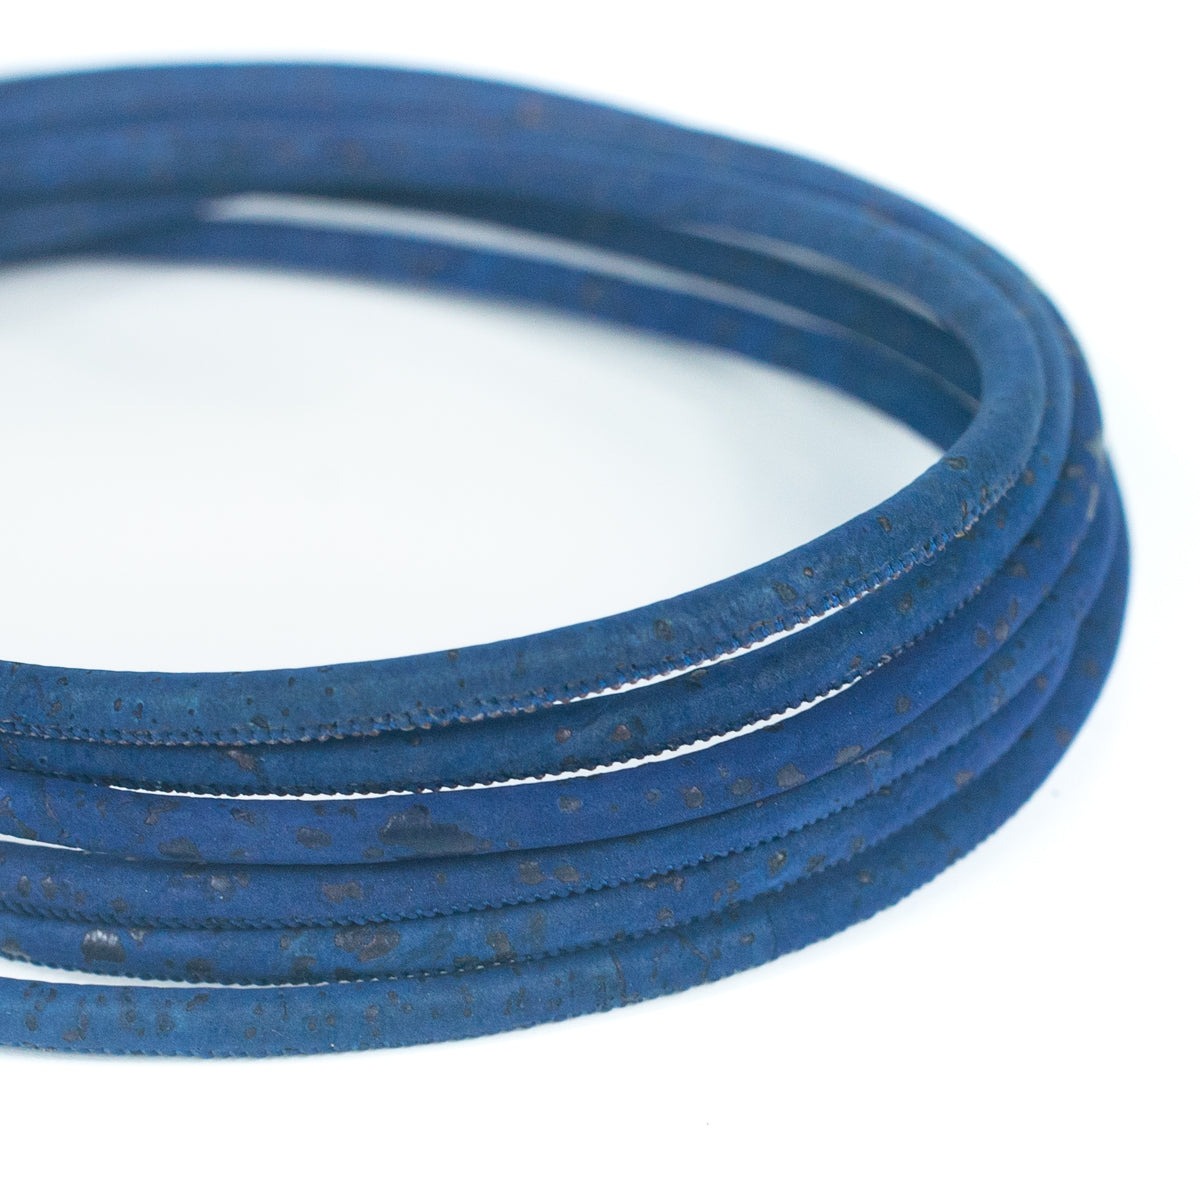 10 meters of Navy Blue Cork Cord 5mm Round String COR-125